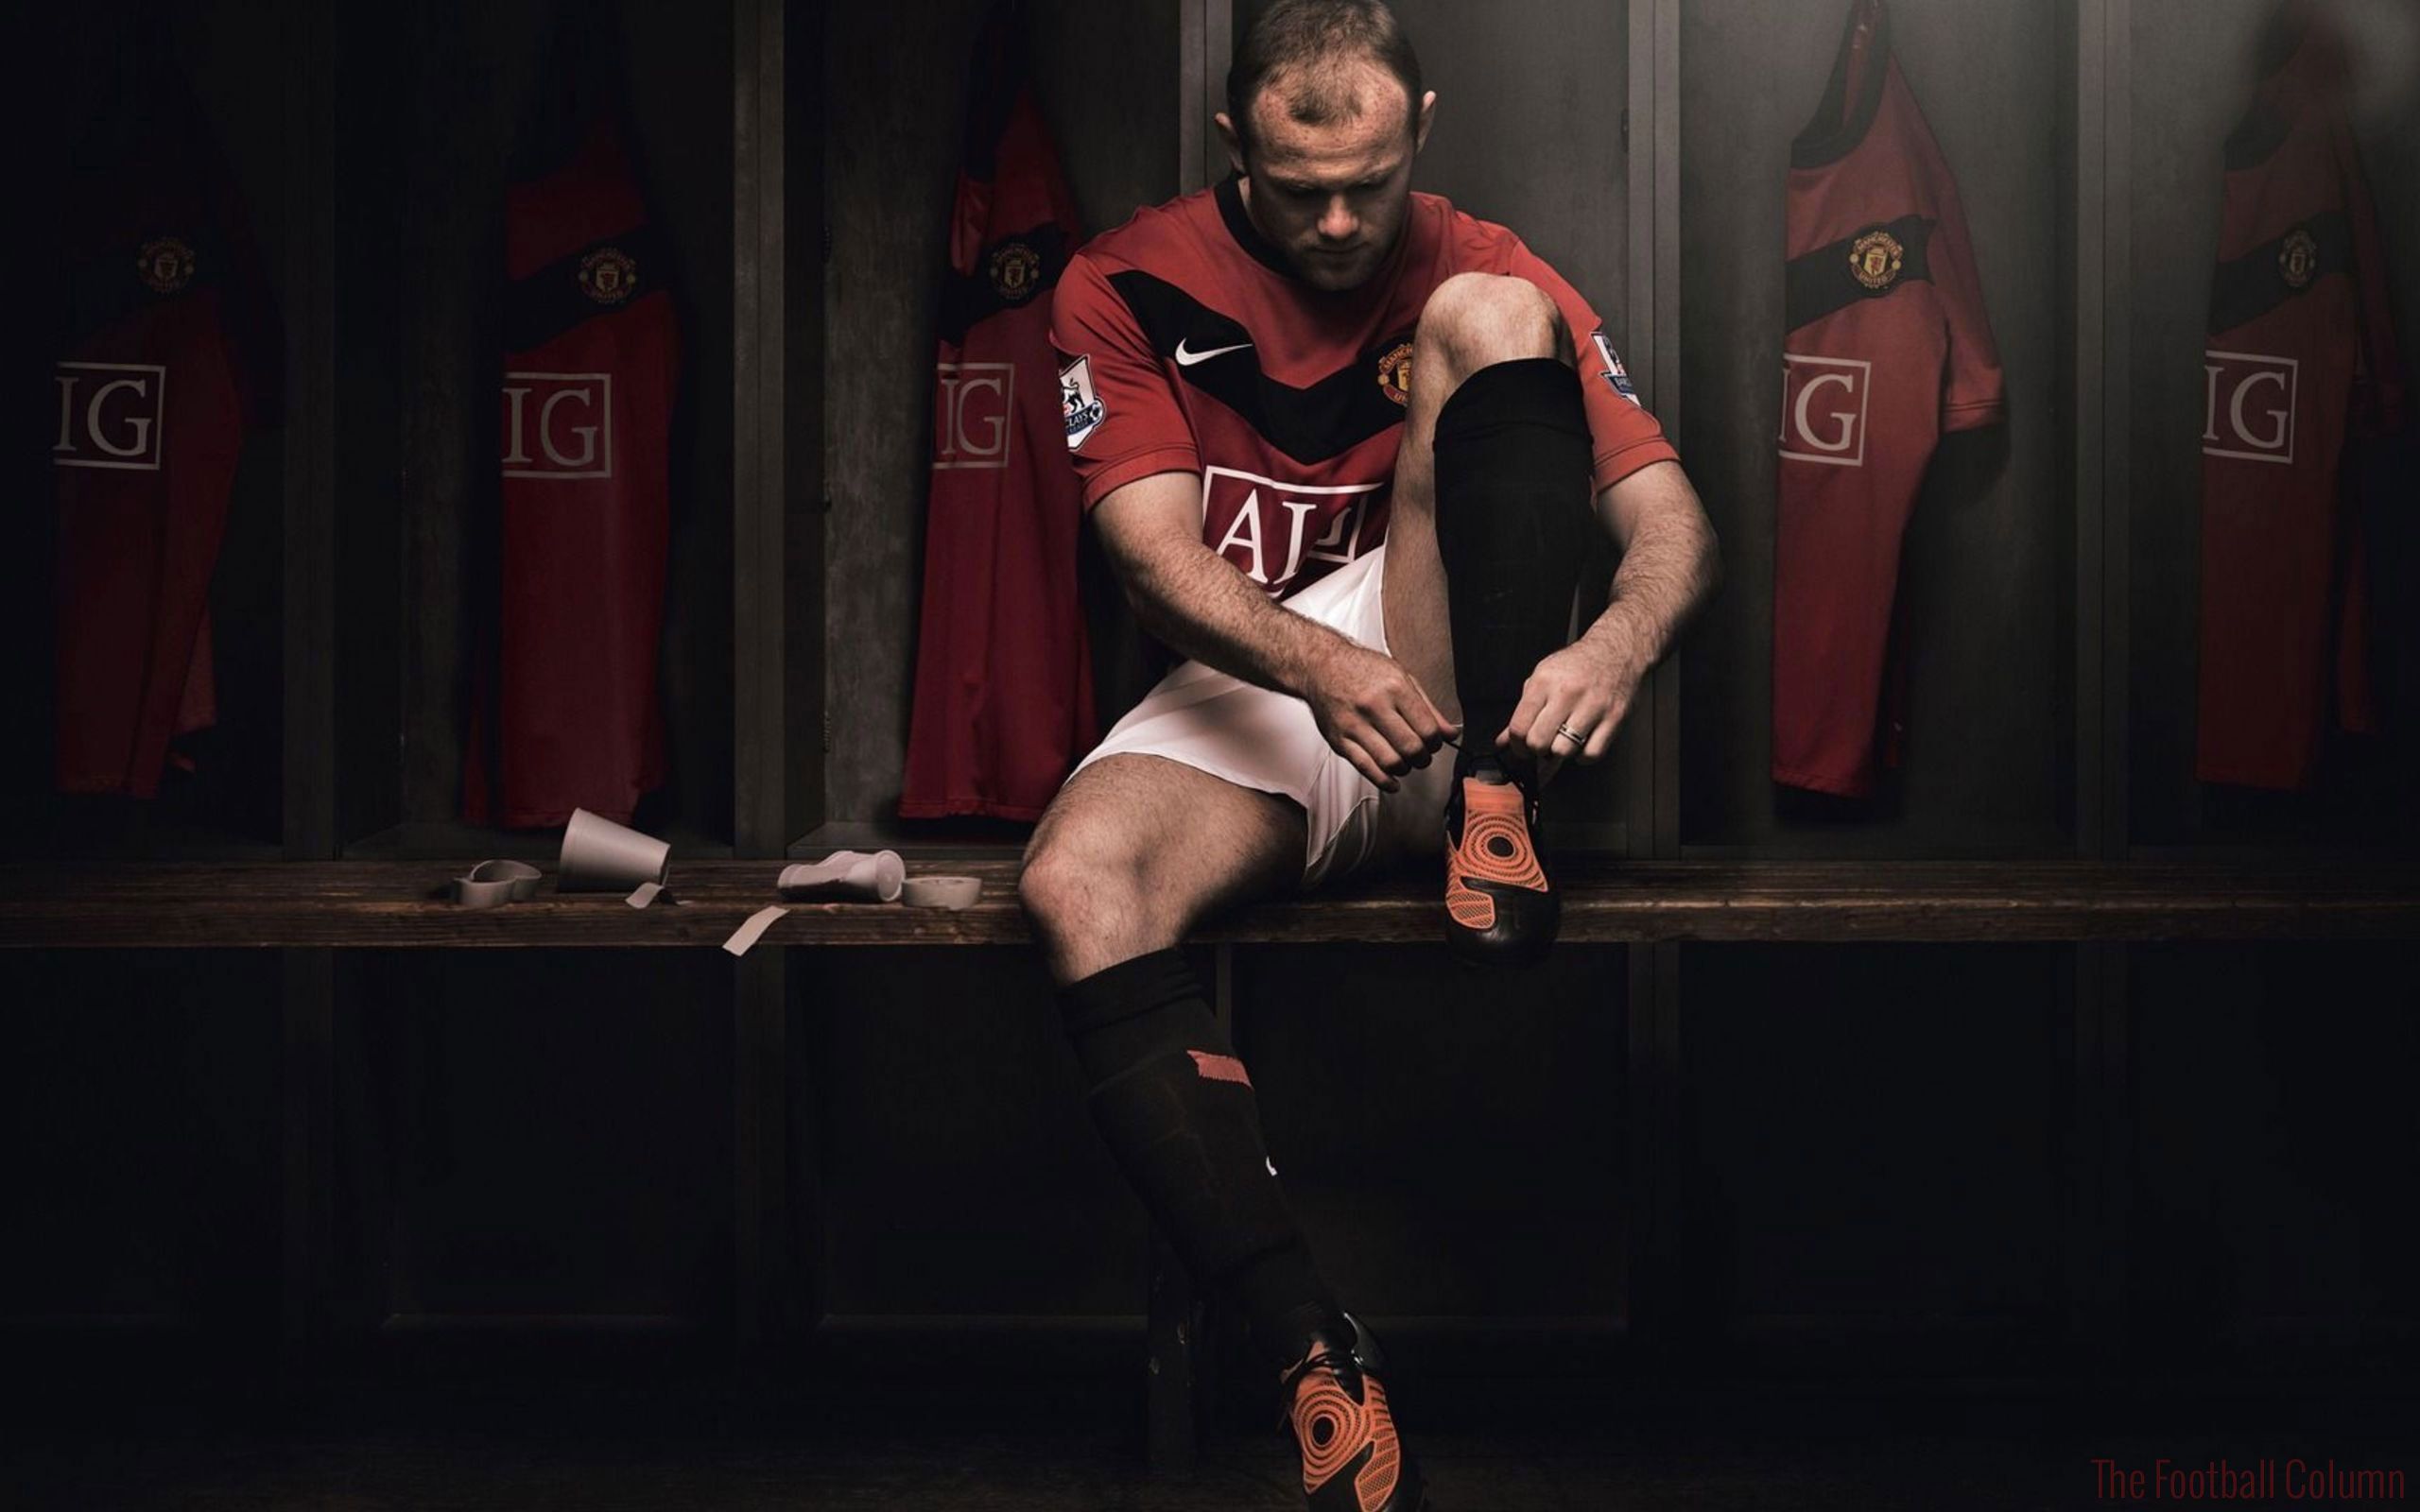 Manchester United Wallpaper Player In Changing Room, HD